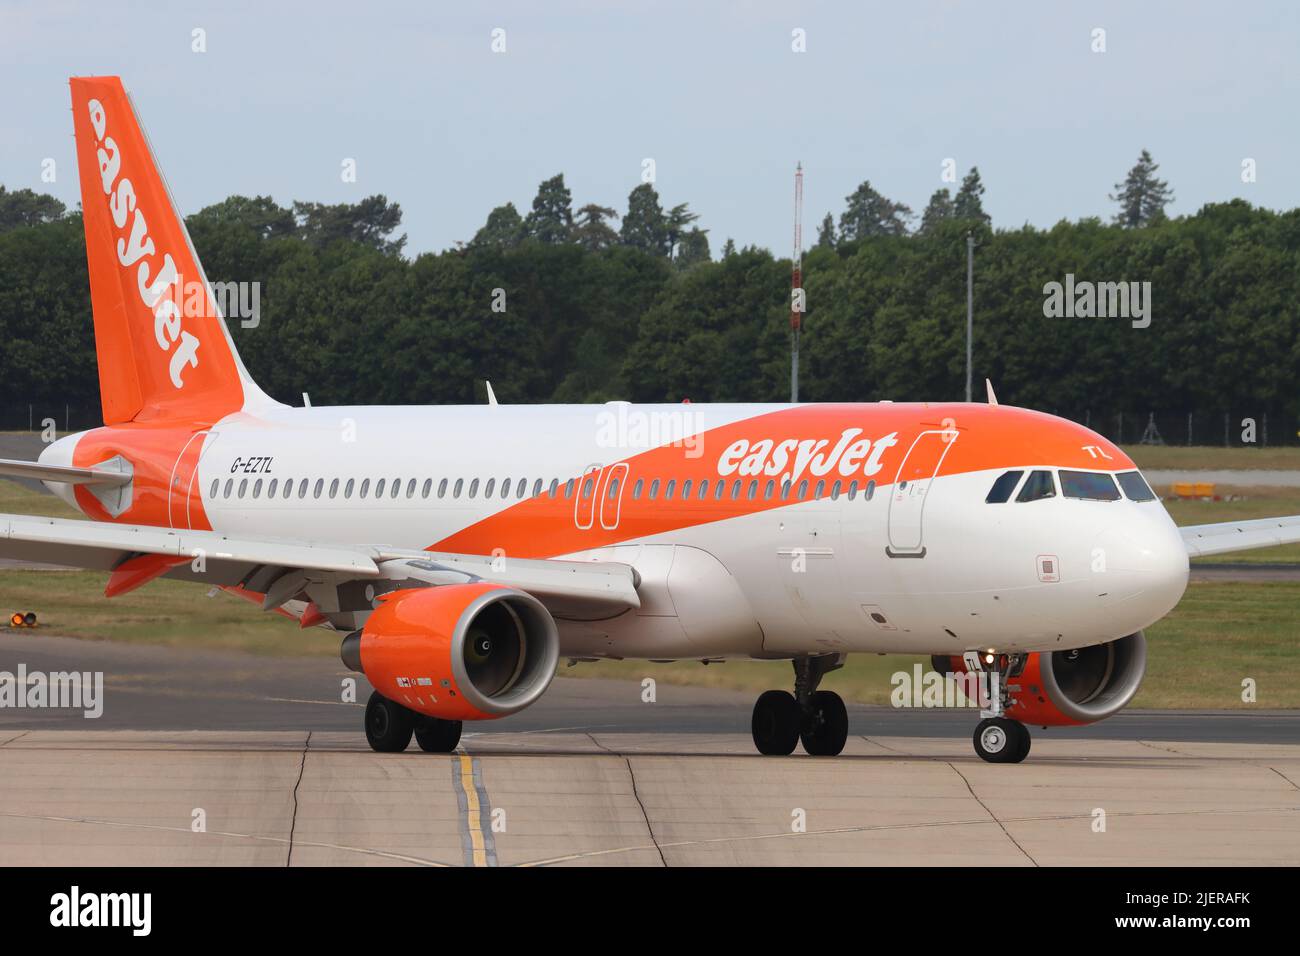 Easyjet, Airbus G-EZTL, arriving at Stansted Airport, Essex, UK Stock Photo